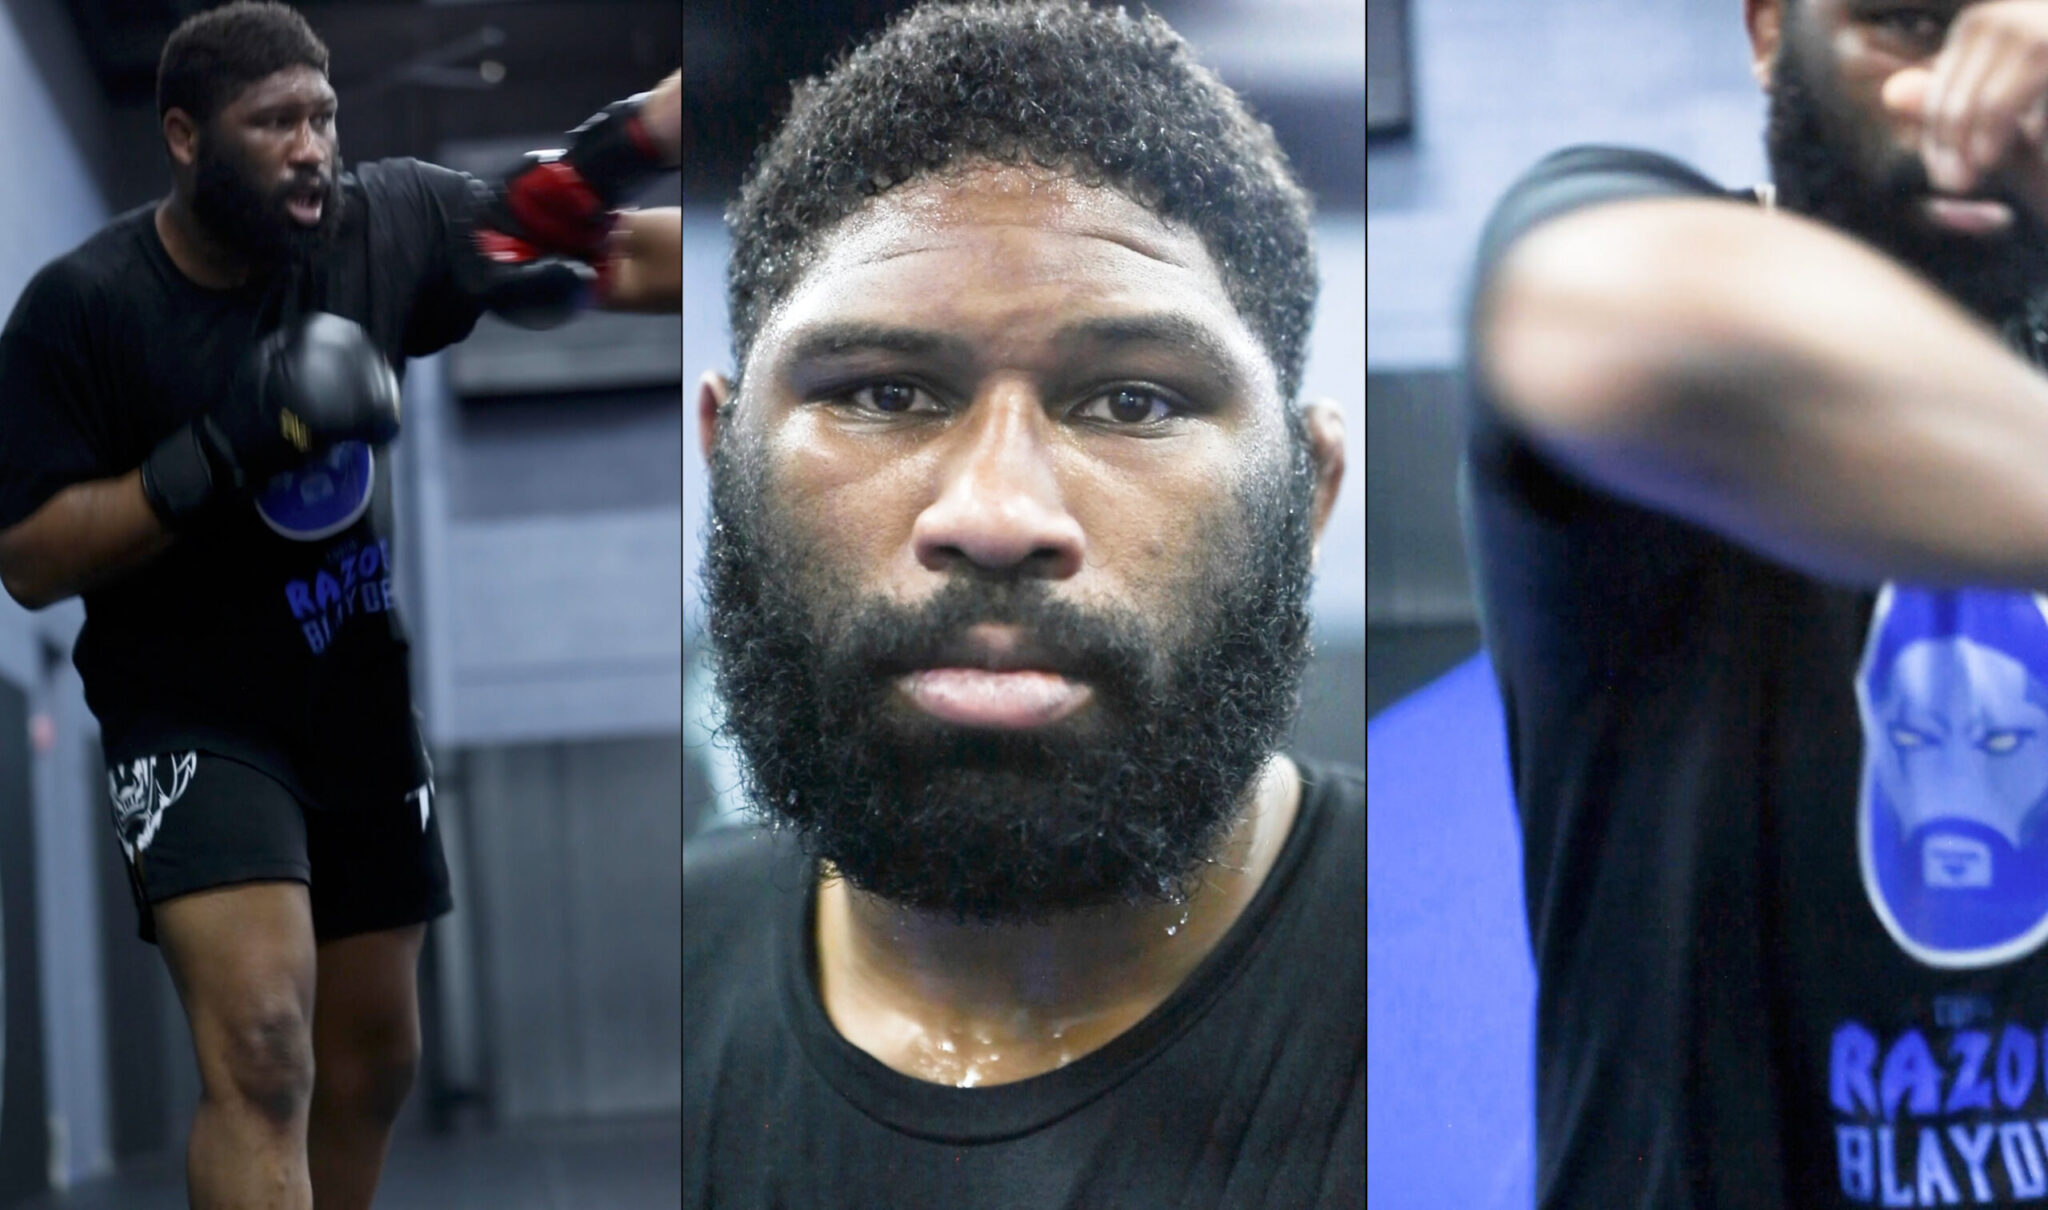 curtis blaydes professional ufc fighter photos by photographer jeff fried